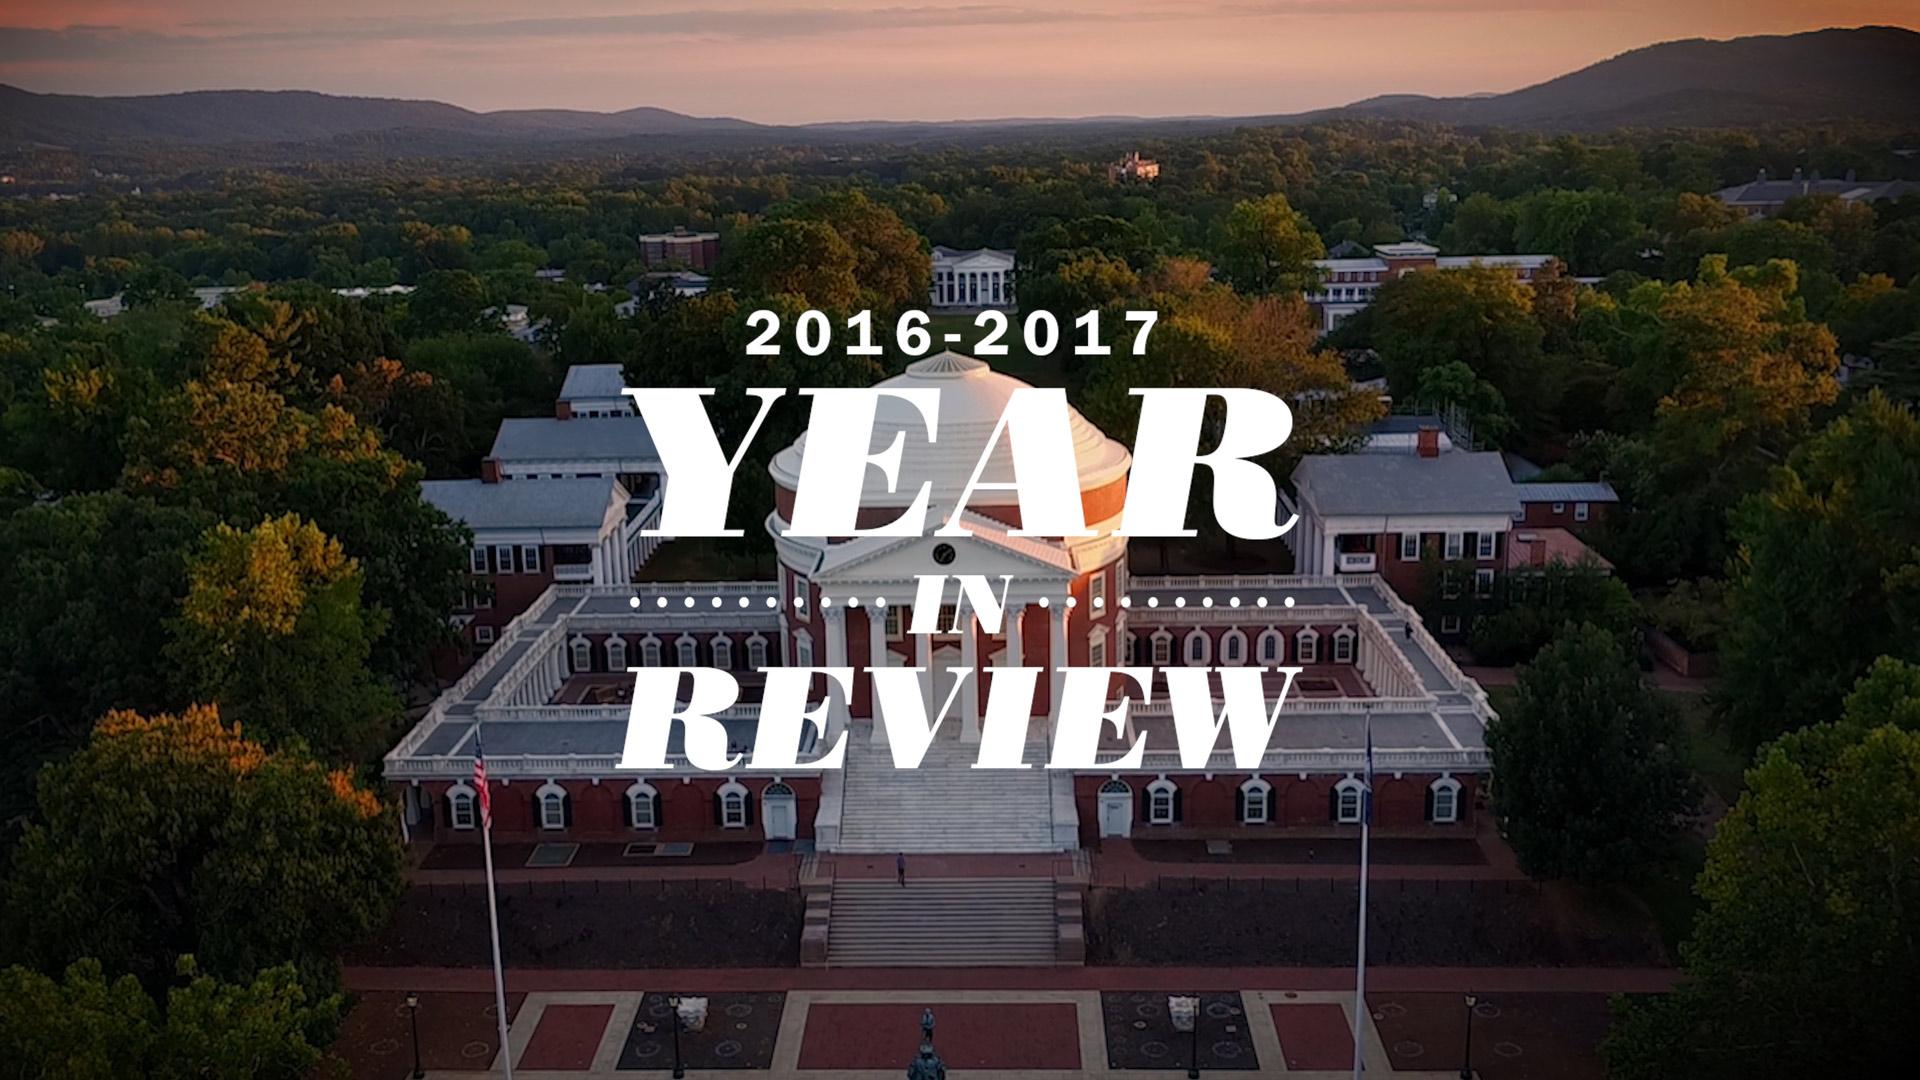 text reads: 2016-2017 Year-In-Review